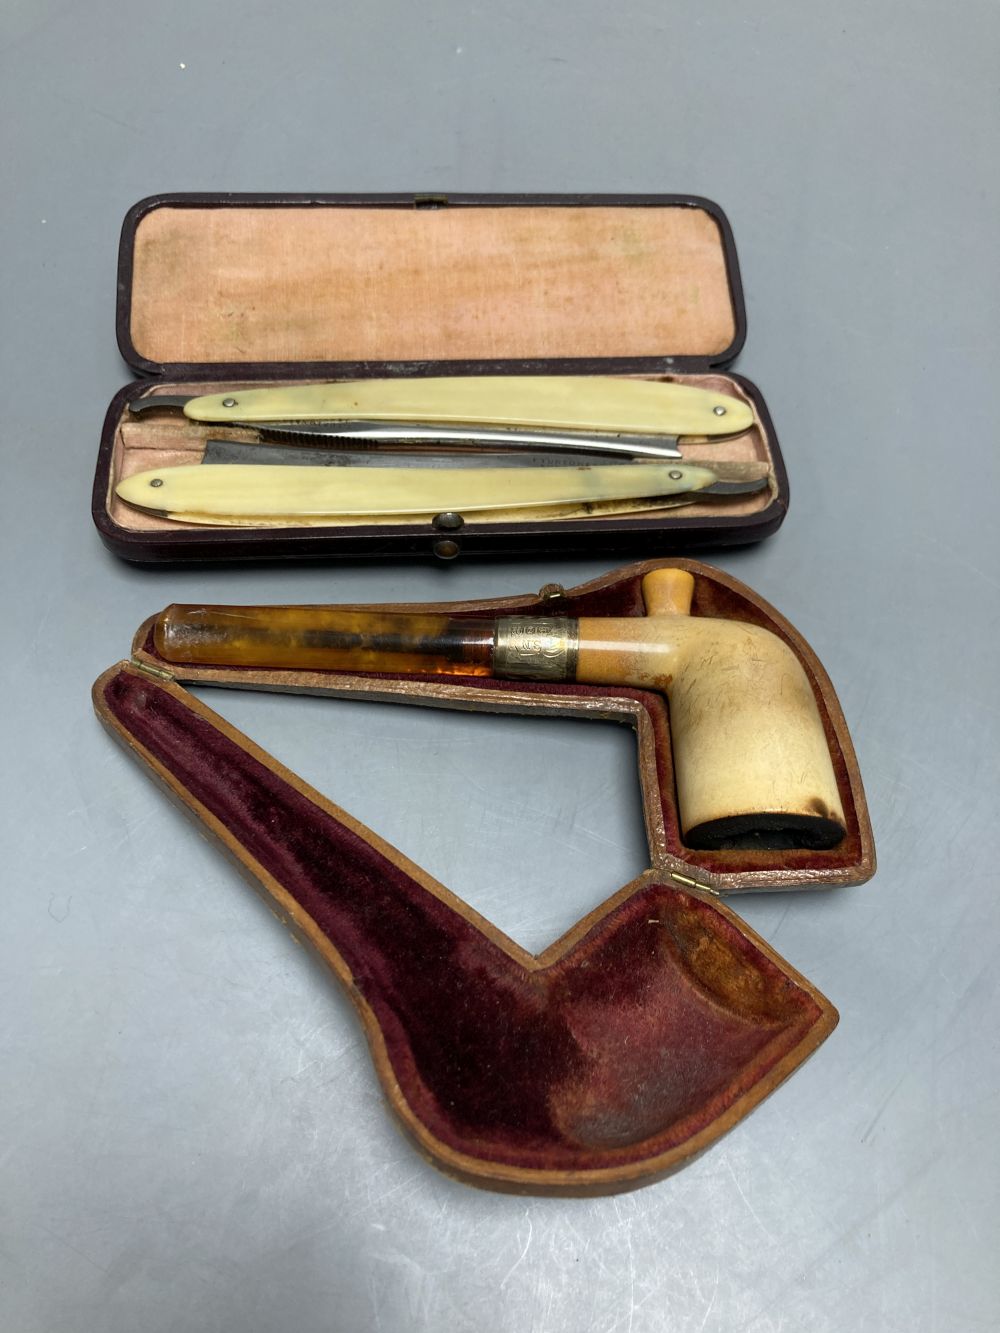 A silver-mounted Meerschaum pipe and two cut-throat razors, all cased